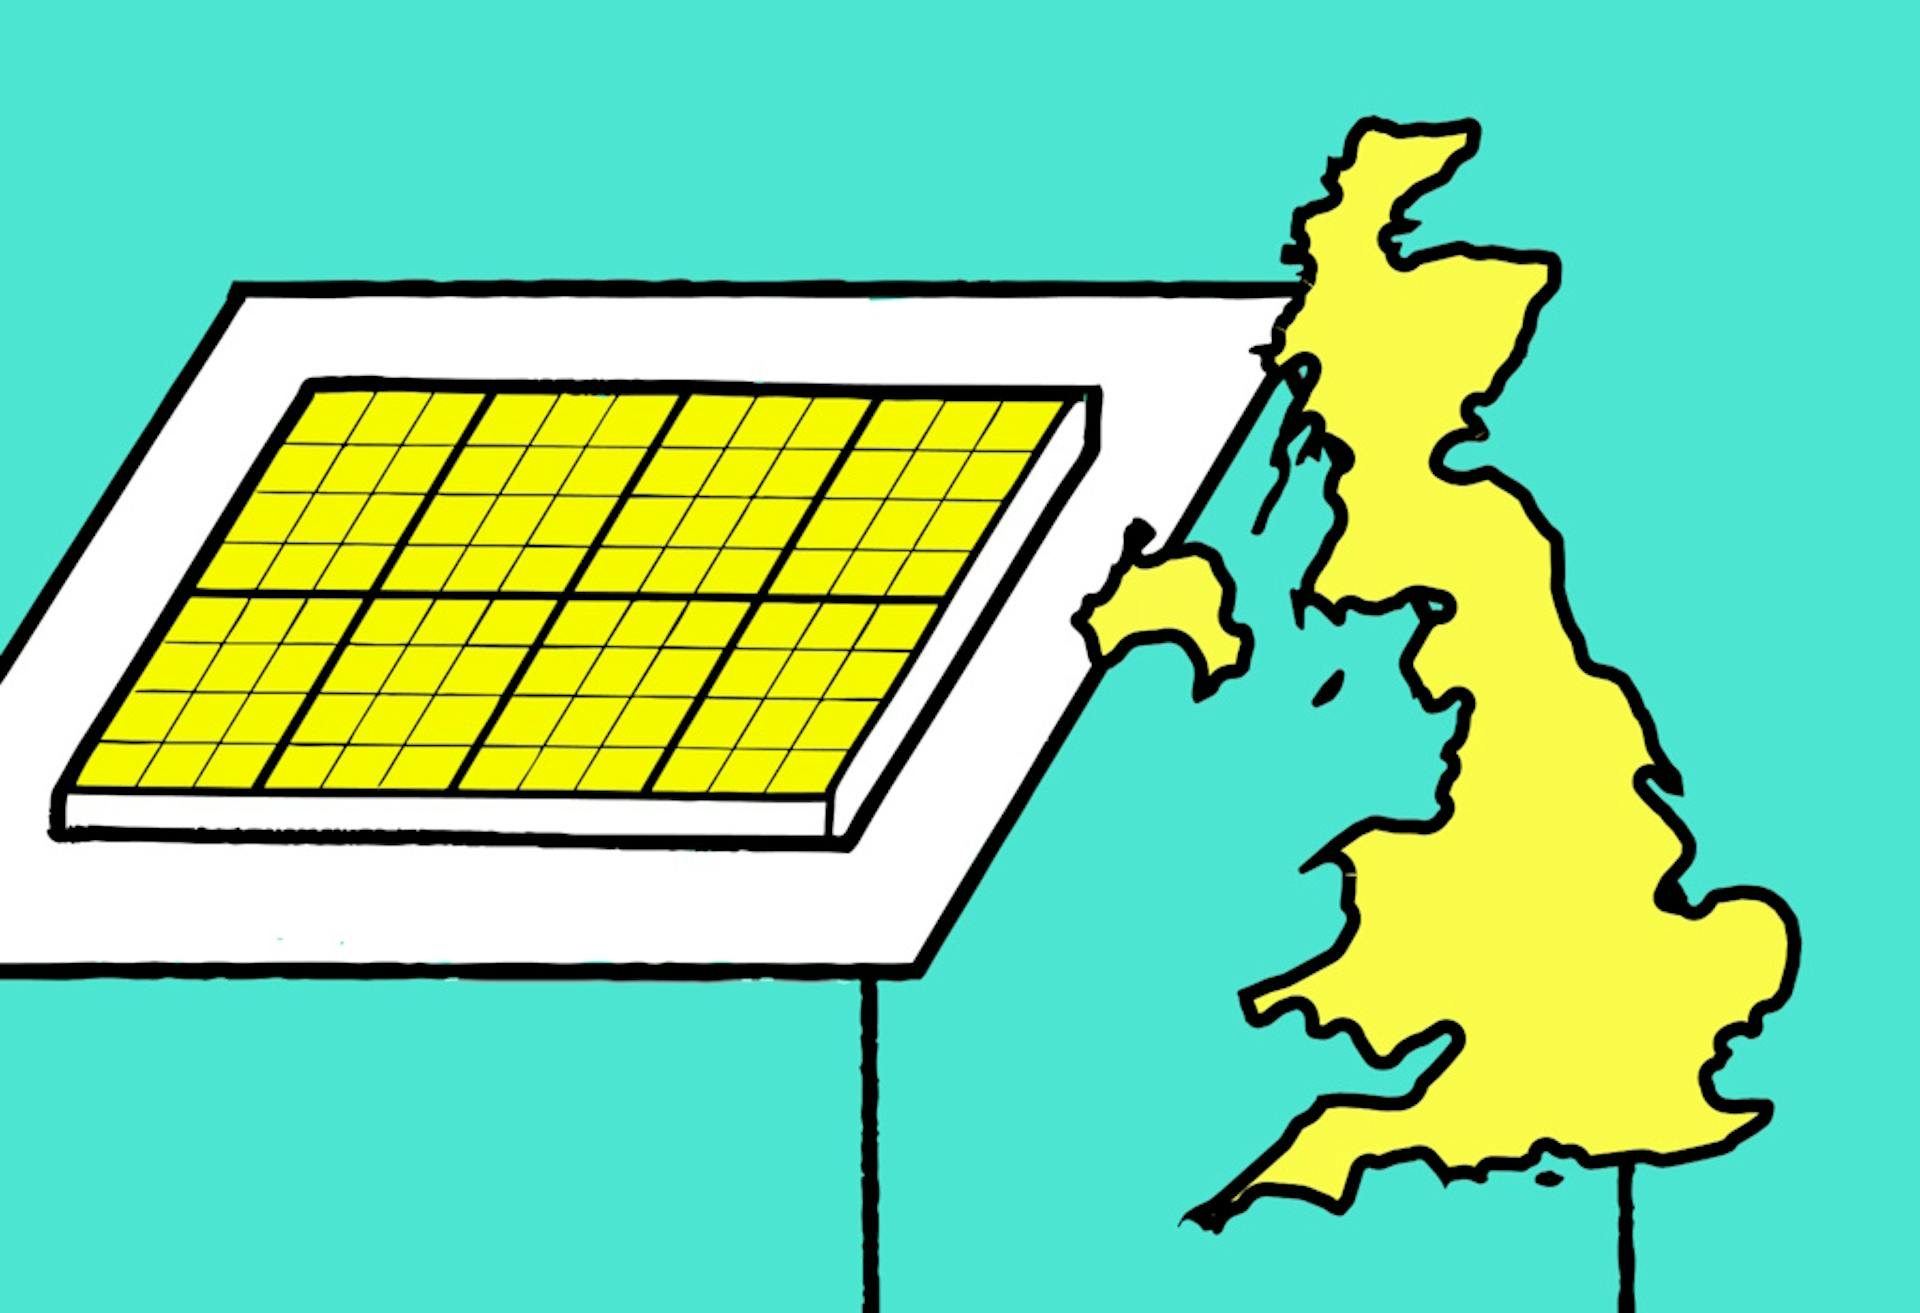 A graphic of the UK in yellow, outlined in black, next to a graphic of a solar panel in yellow, outlined in black, against an aquamarine background